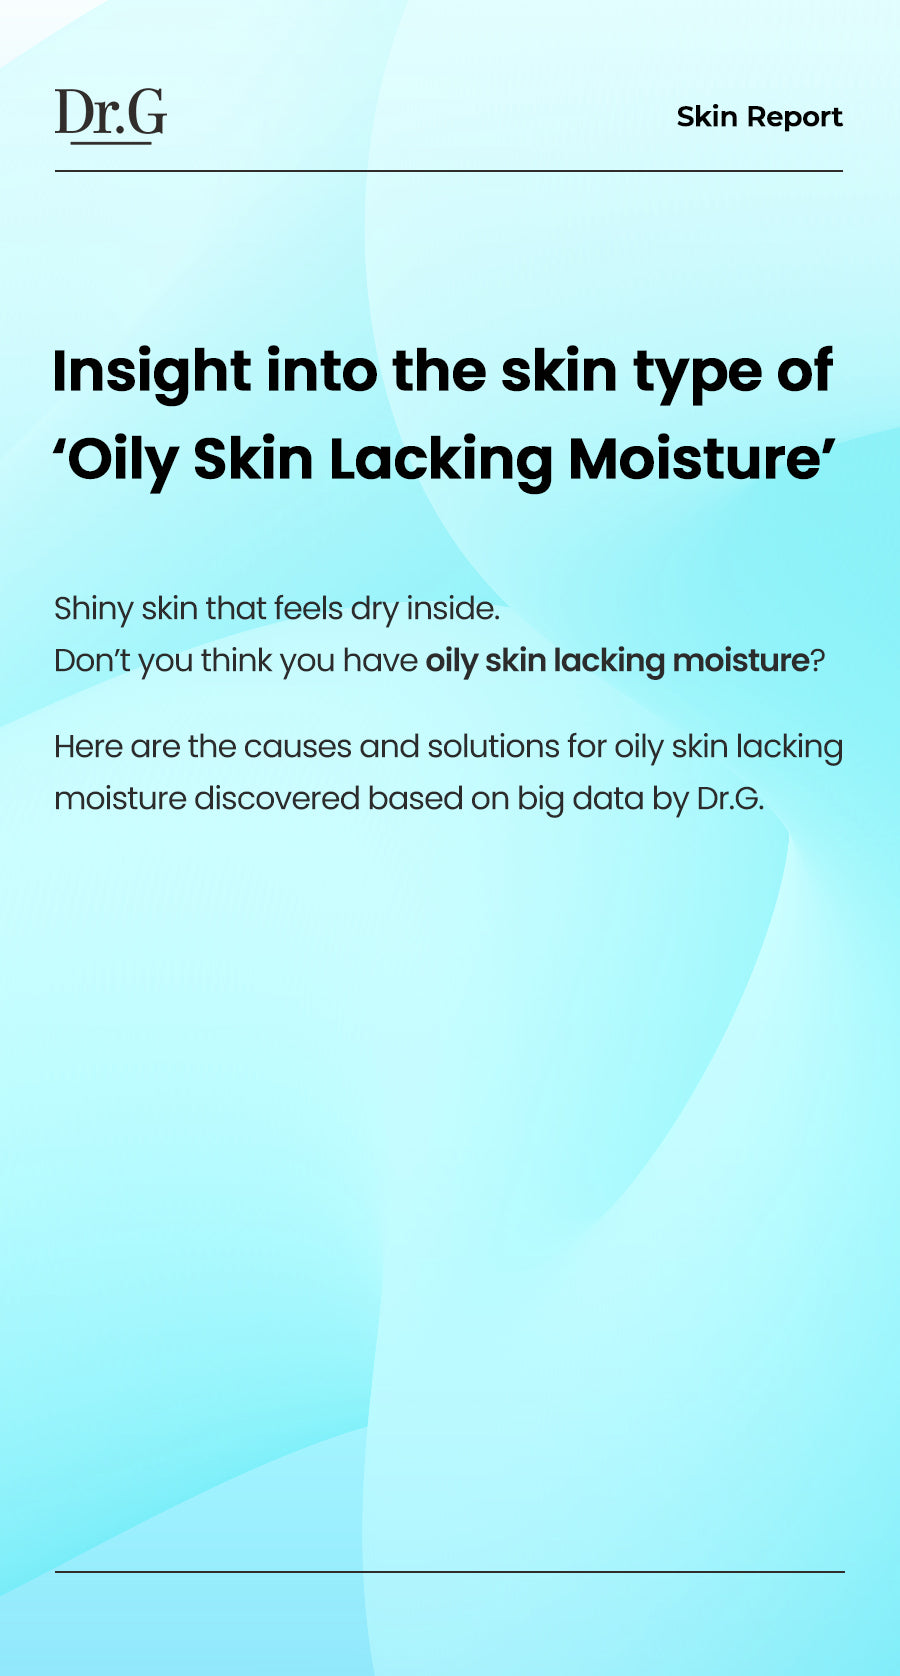 Insight into the skin type of ‘Oily skin lacking moisture’